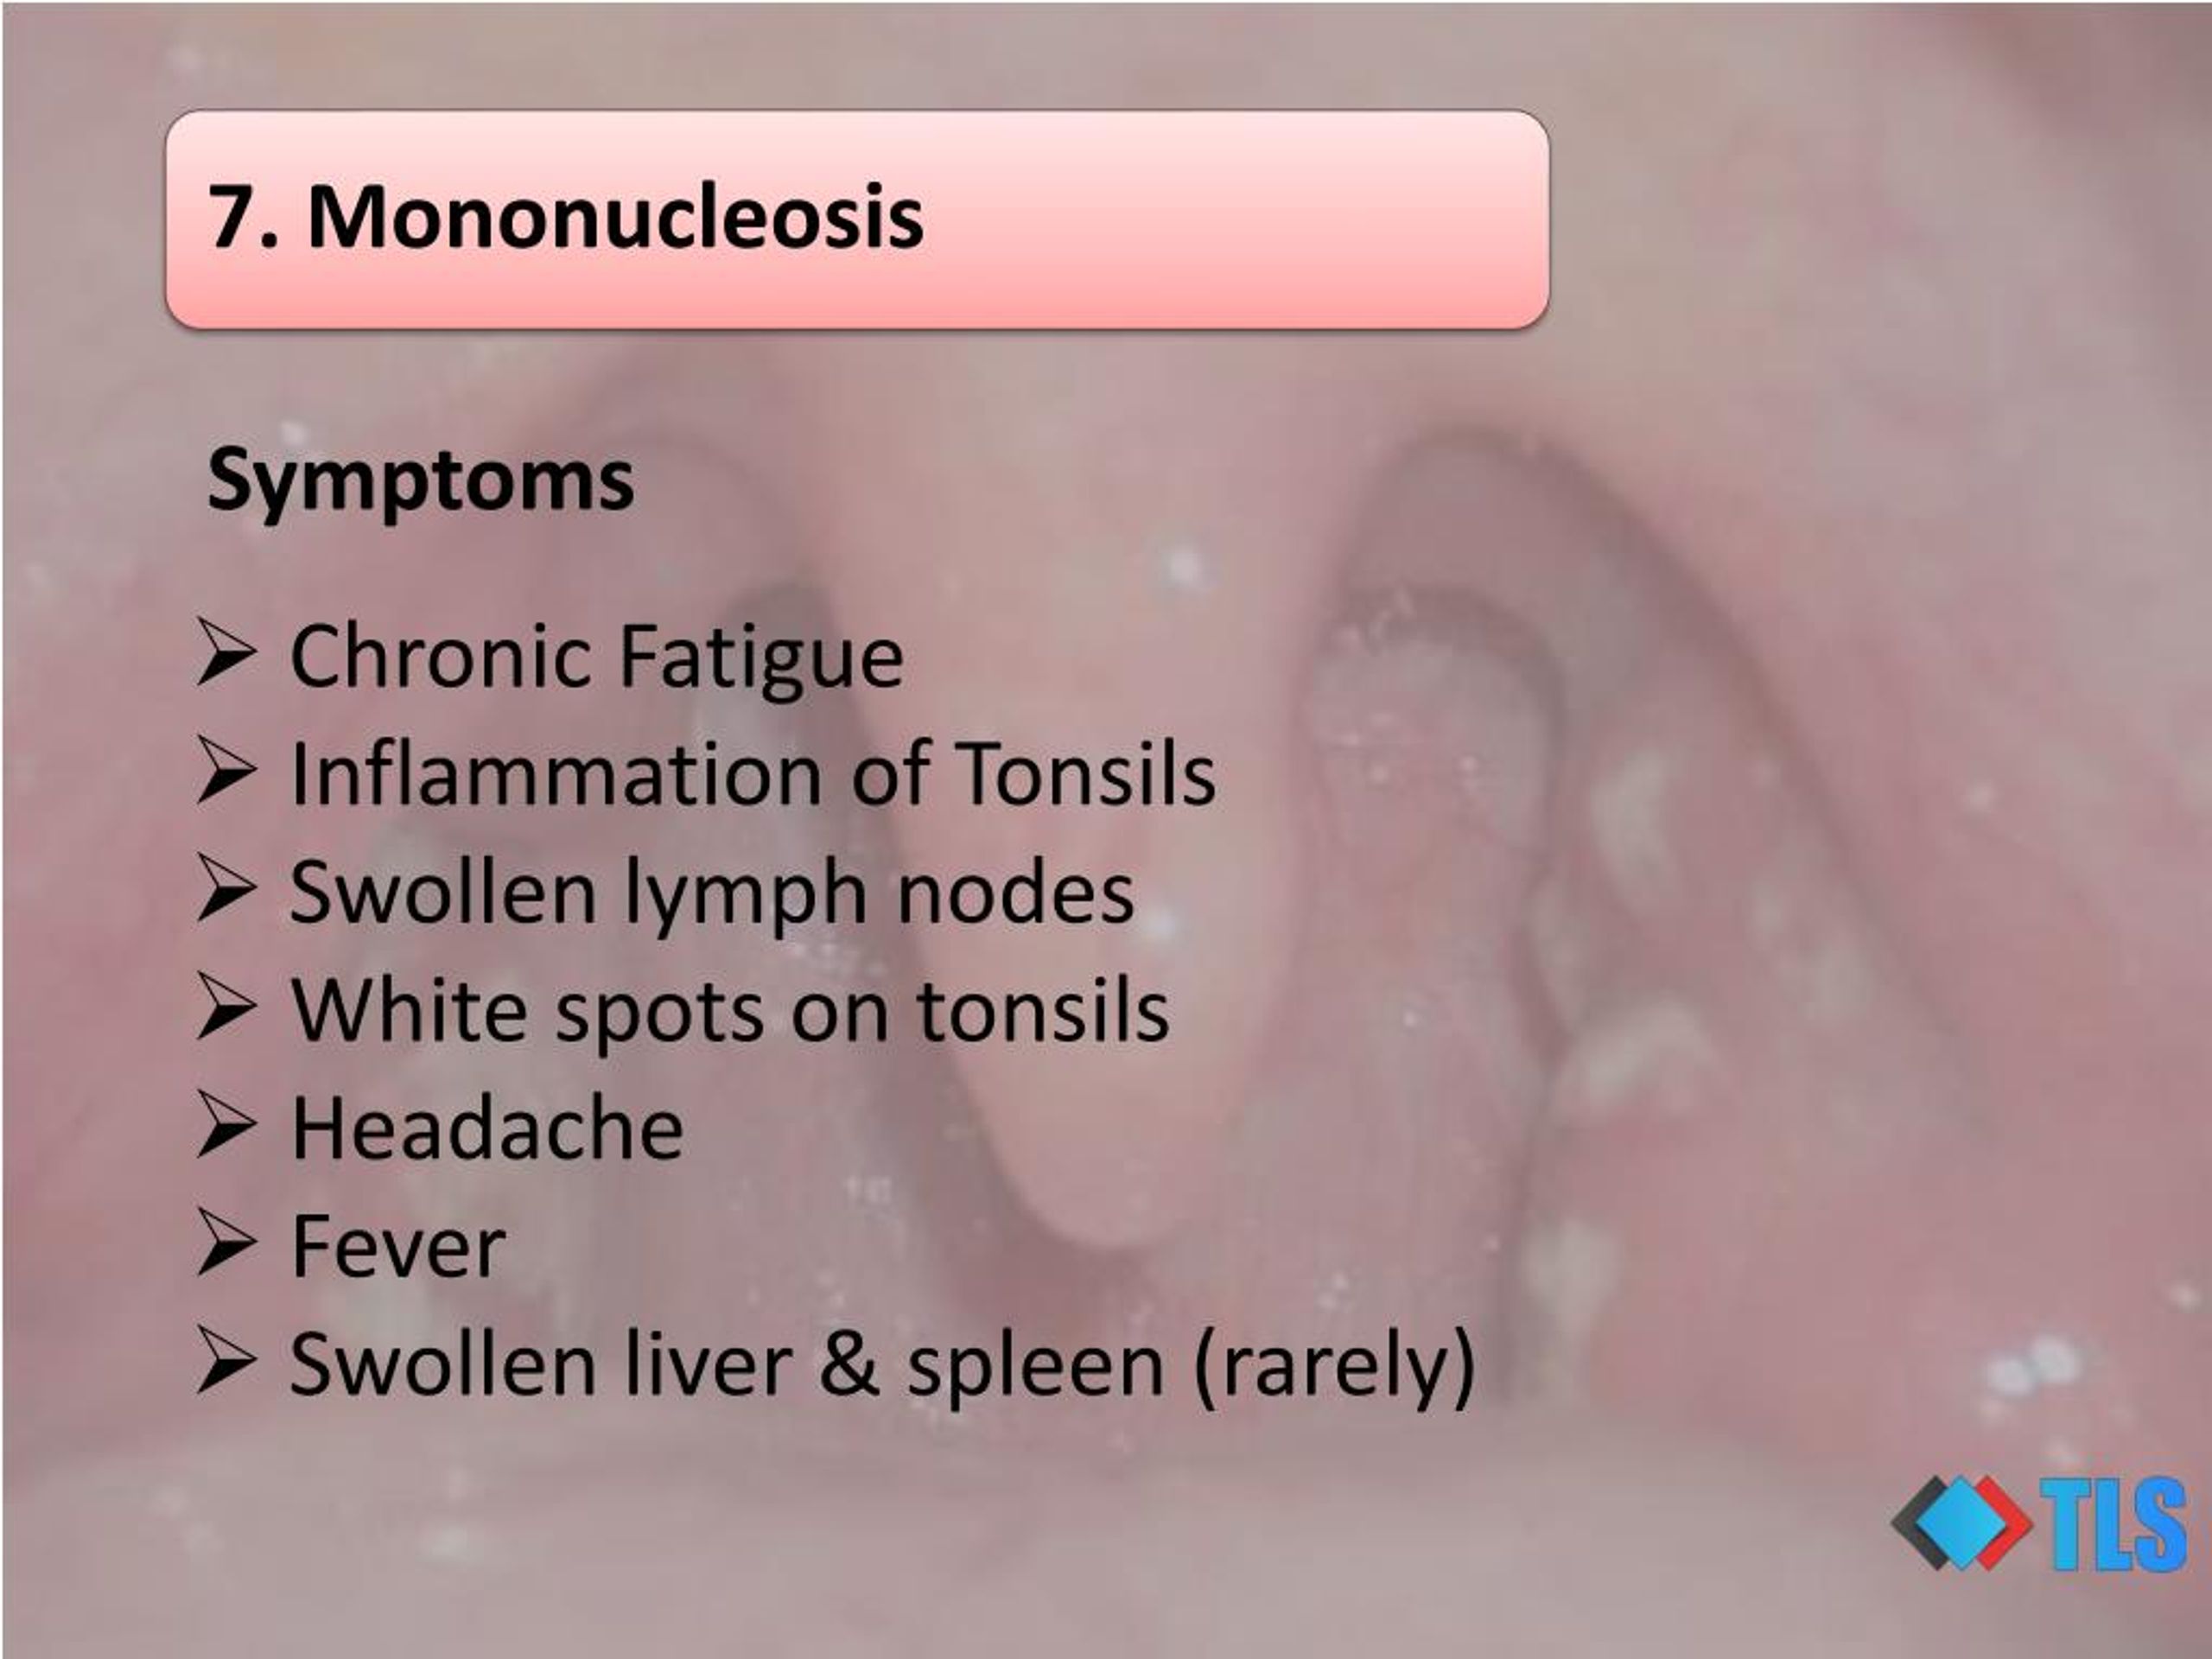 PPT - 8 Causes of White Spots On Tonsils You May Not Know PowerPoint ...